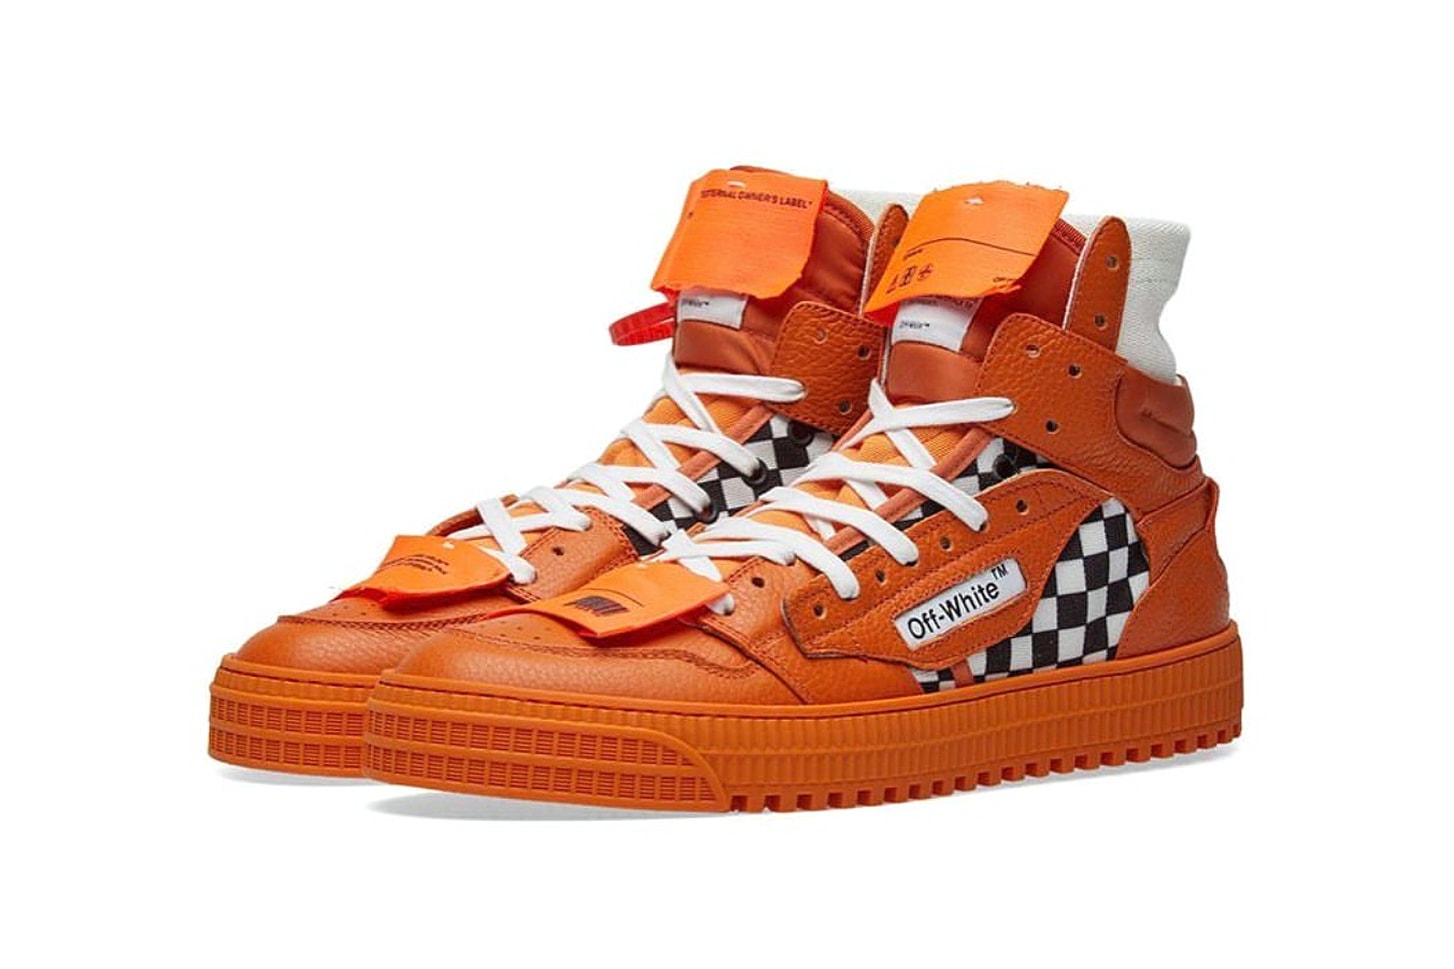 off-white virgil abloh 3.0 off-court sneakers orange white laces checkerboard